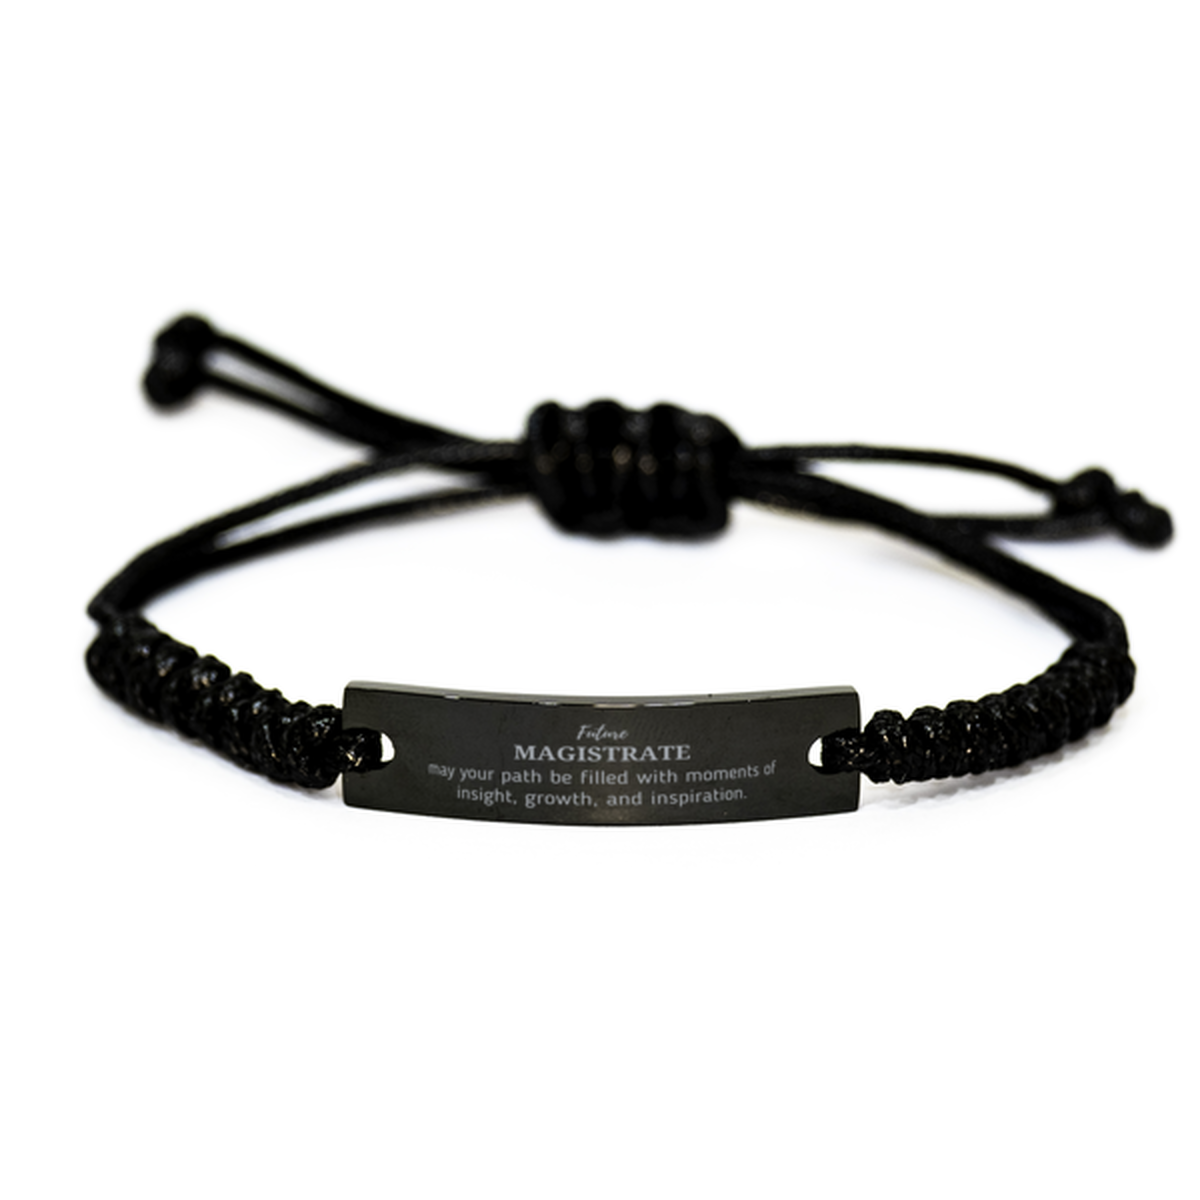 Future Magistrate Gifts, May your path be filled with moments of insight, Graduation Gifts for New Magistrate, Christmas Unique Black Rope Bracelet For Men, Women, Friends